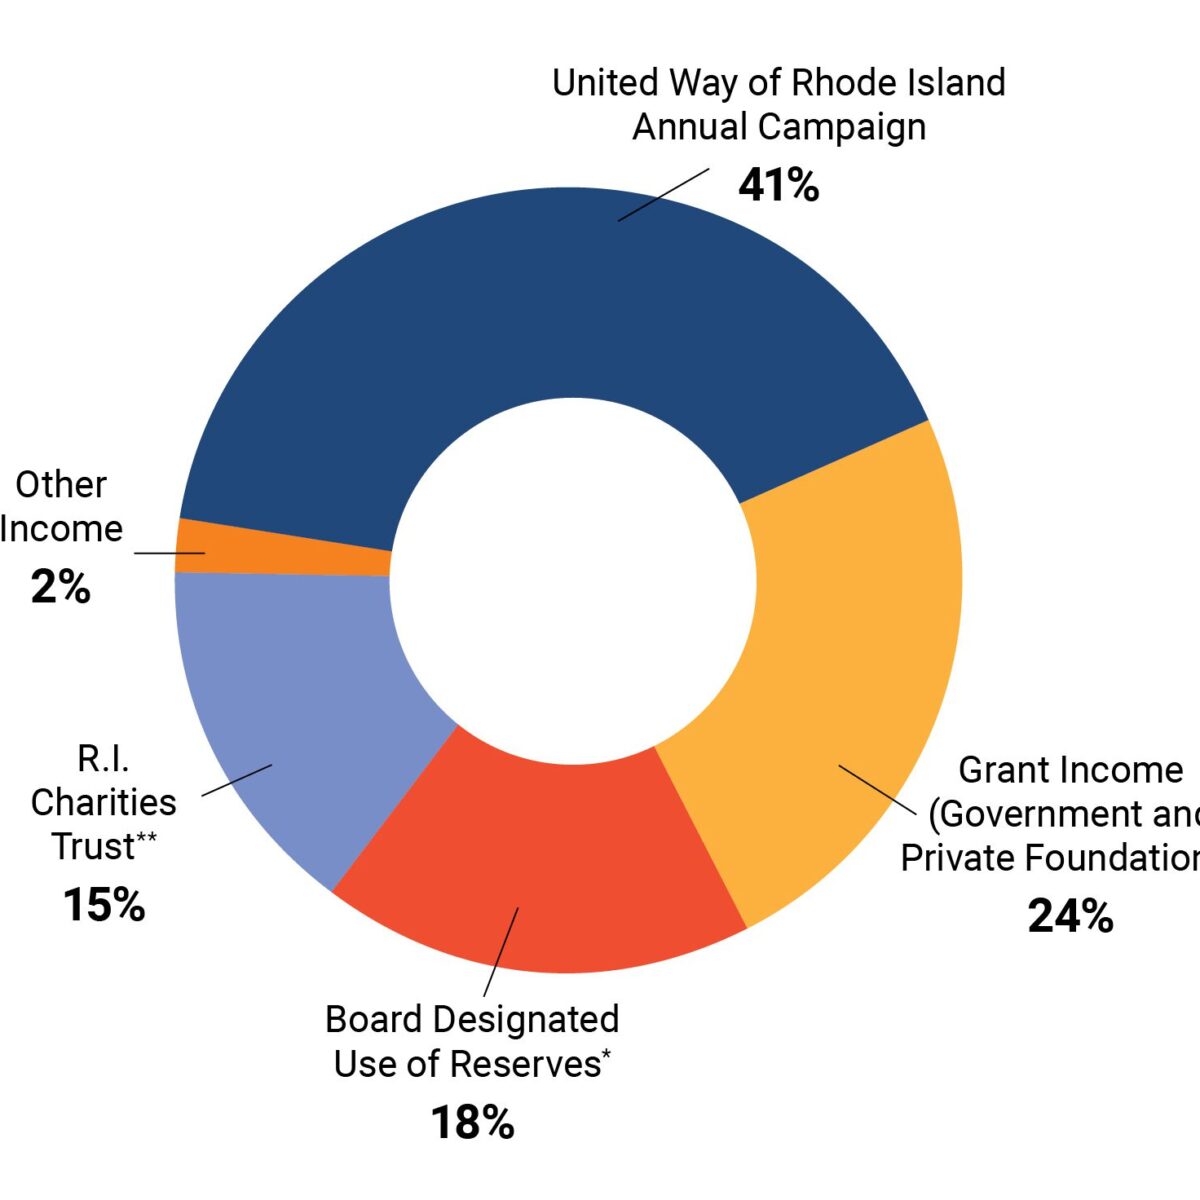 The Breakdown of Resources: United Way of Rhode Island Annual Campaign 41%, Grant Income (Government and Private Foundations) 24%, Board Designated Use of Reserves* 18%, R.I. Charities Trust** 15%, and Other Income 2%